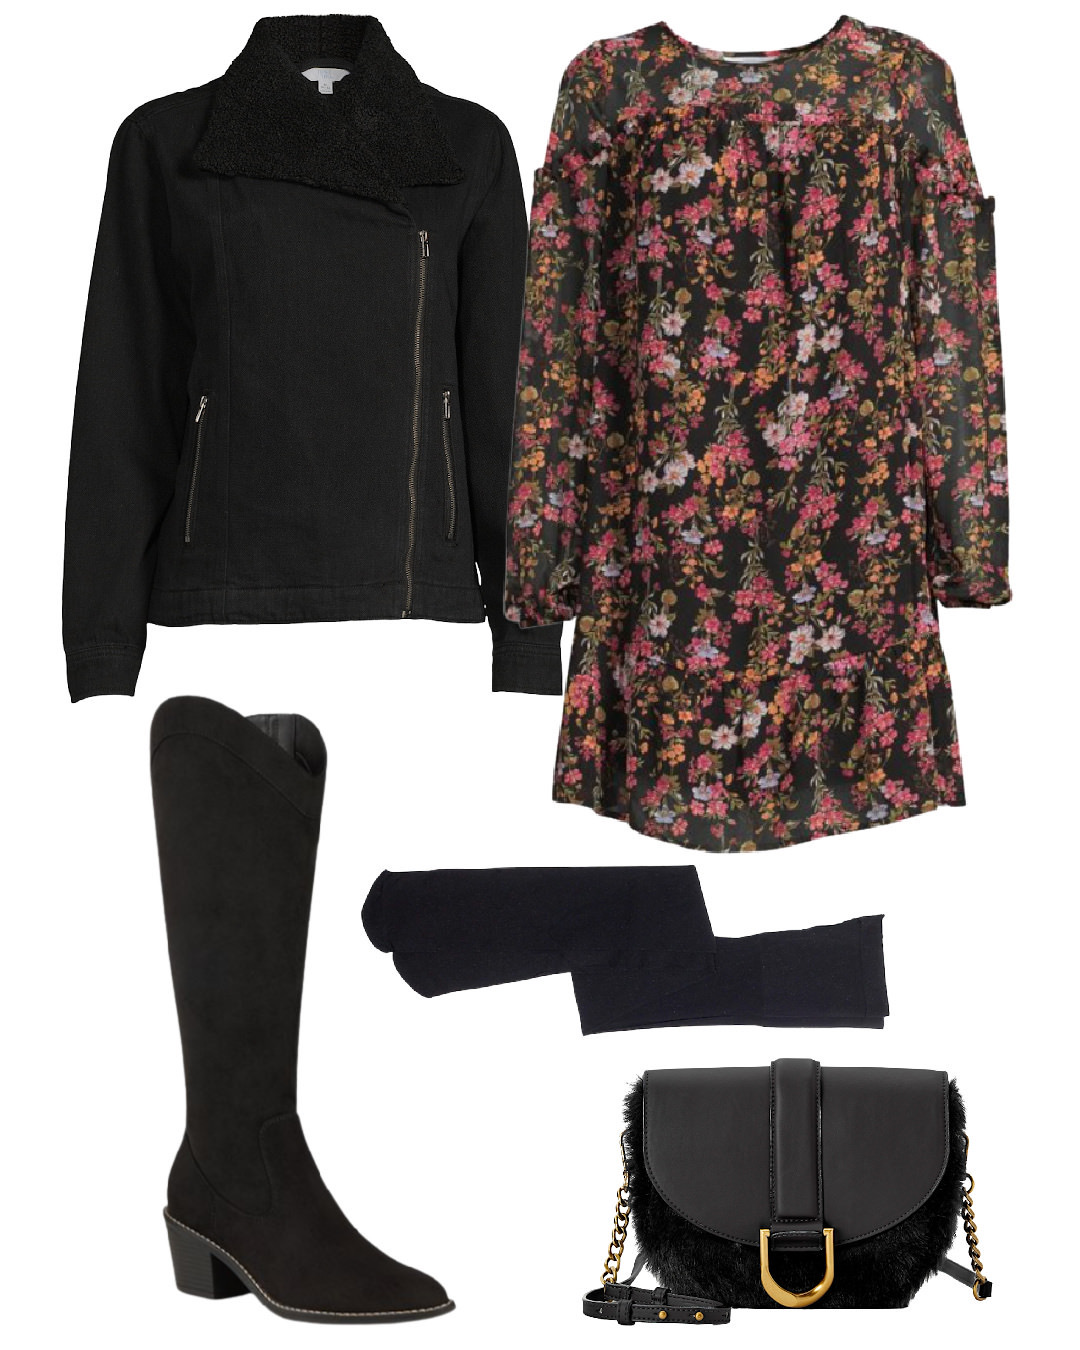 Walmart dressy winter outfit with floral dress and western boots natalie yerger